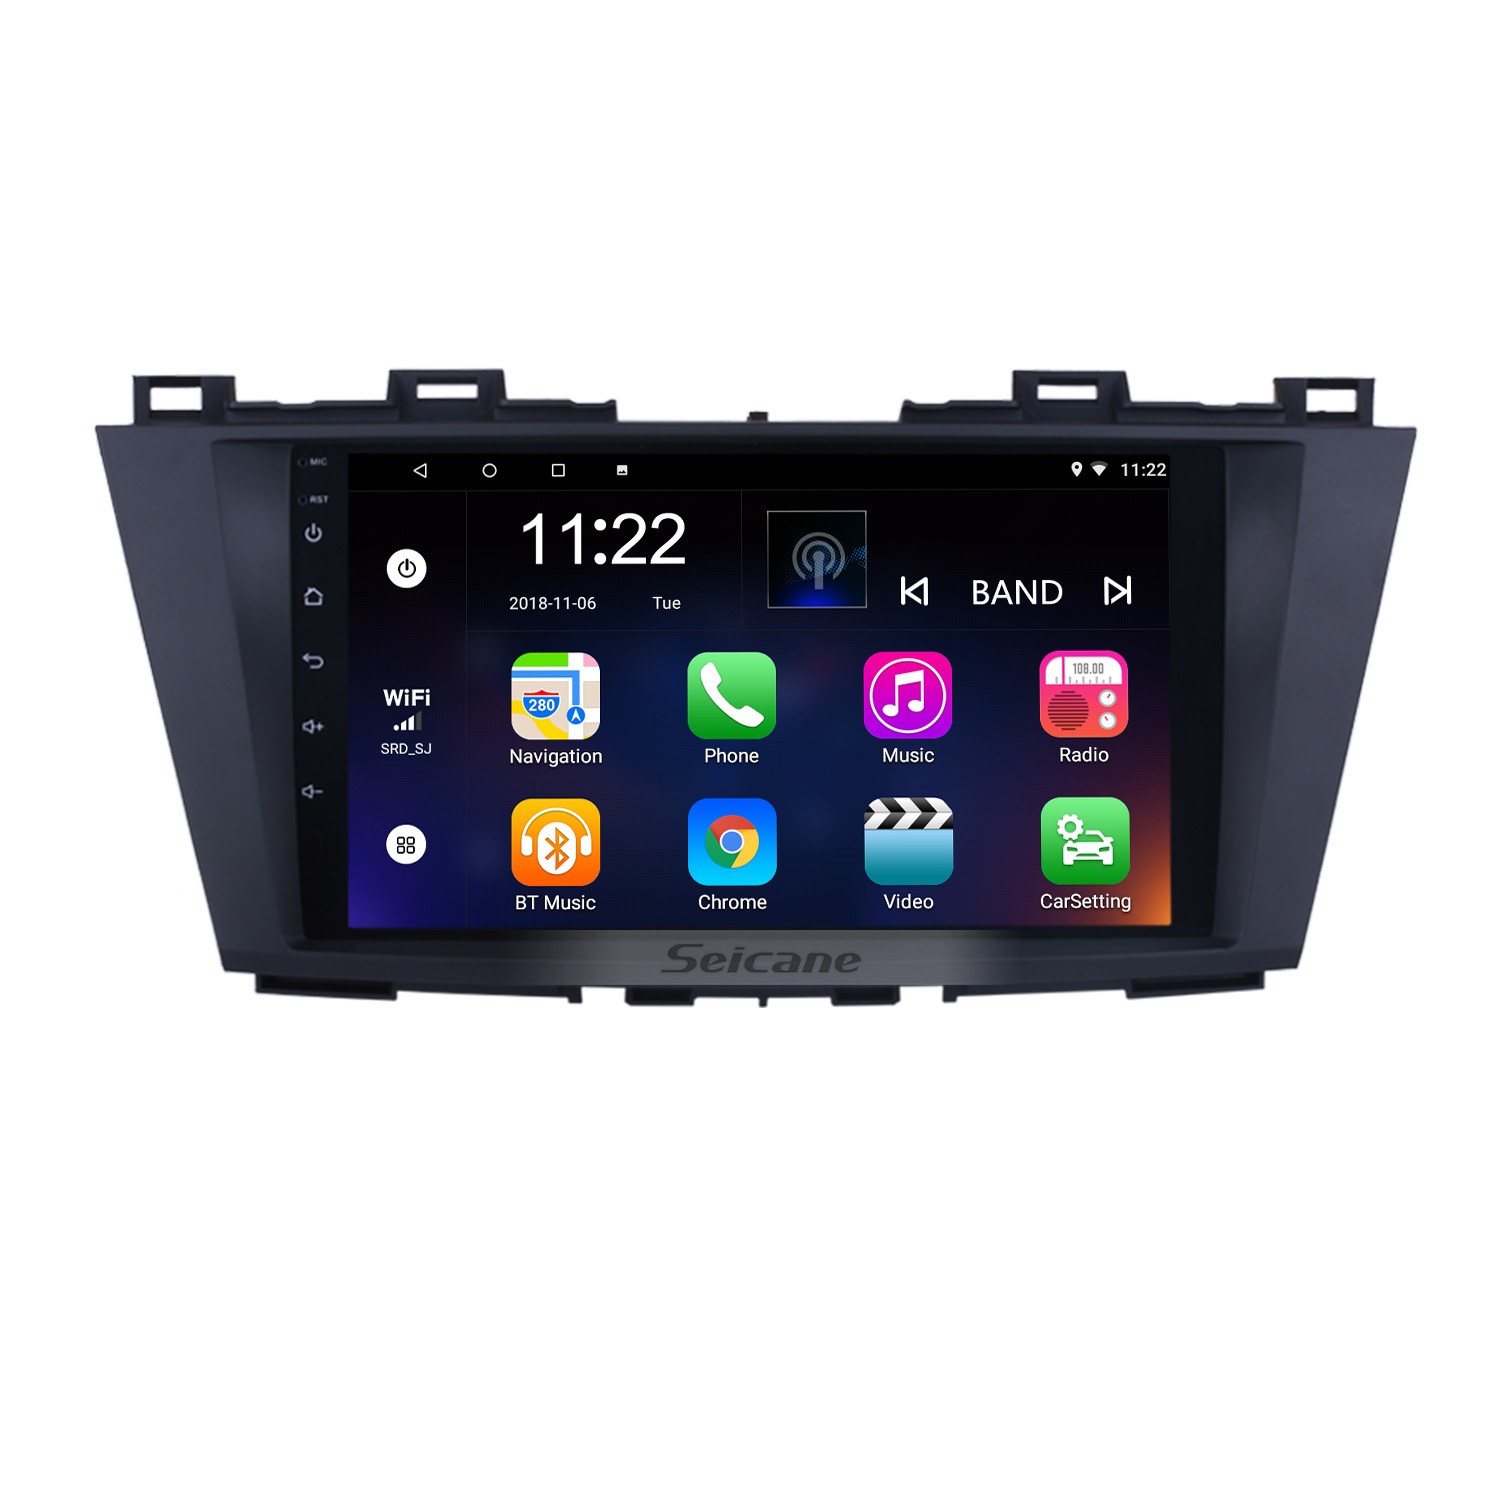  VOLEMI 9-inch 2 Din Android 11 Car Stereo GPS Navigation for  Mazda 5 3 CW 2010-2015 Built in FM AM Car Radio/Carplay Android Auto/DSP  Bluetooth/Steering Wheel Controls/Voice Control (Size : K100S) 